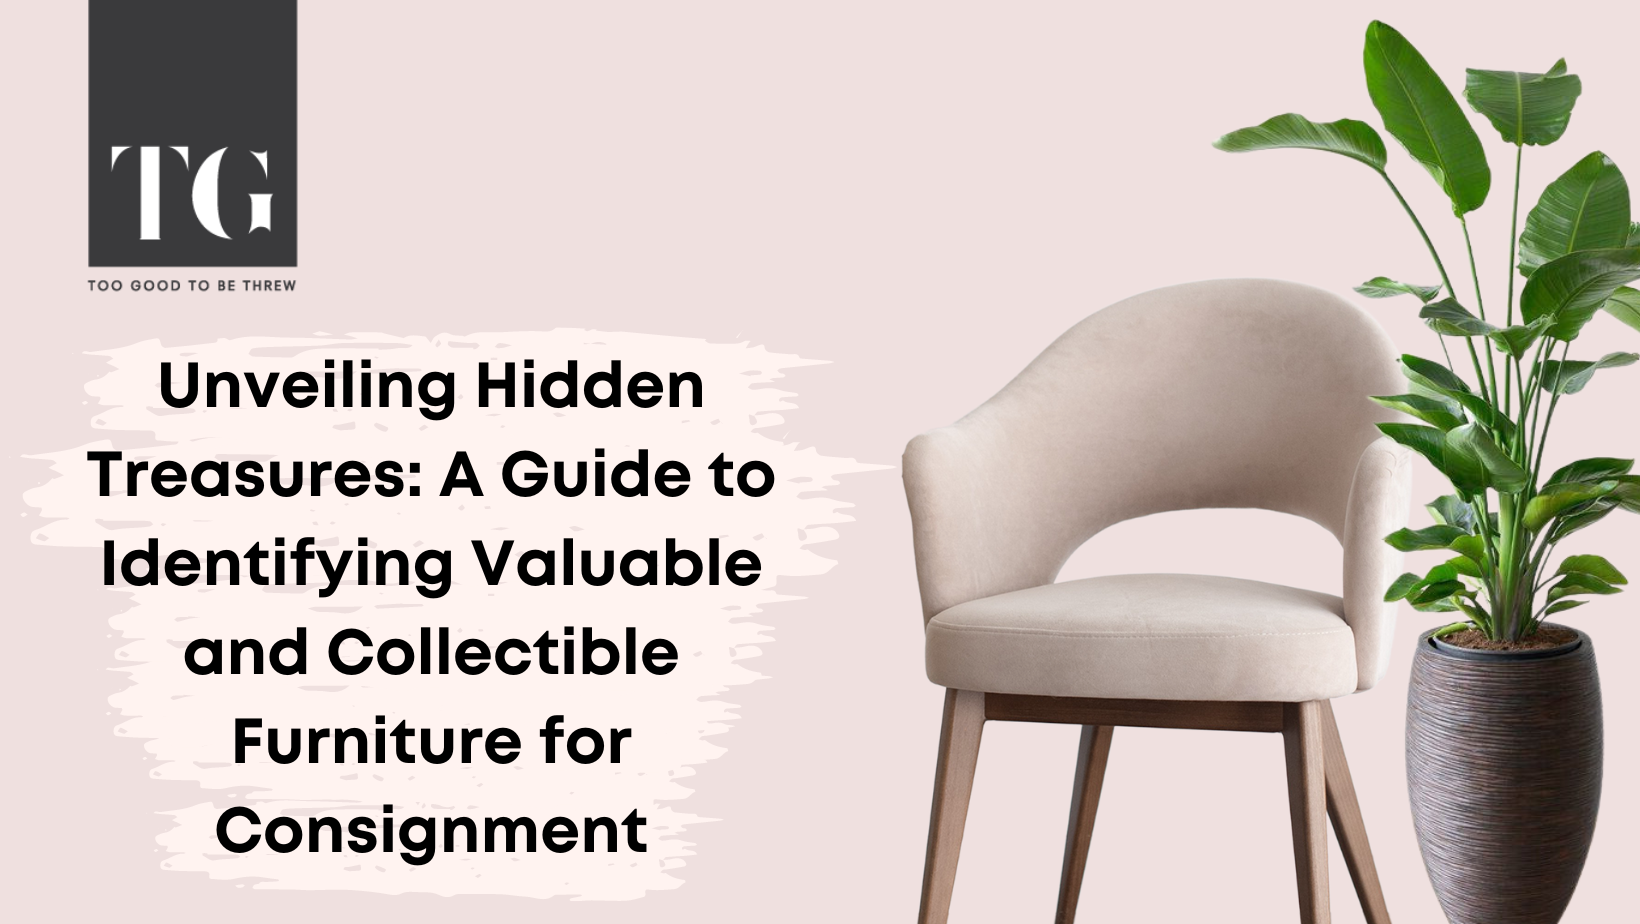 Unveiling Hidden Treasures: A Guide to Identifying Valuable and Collectible Furniture for Consignment